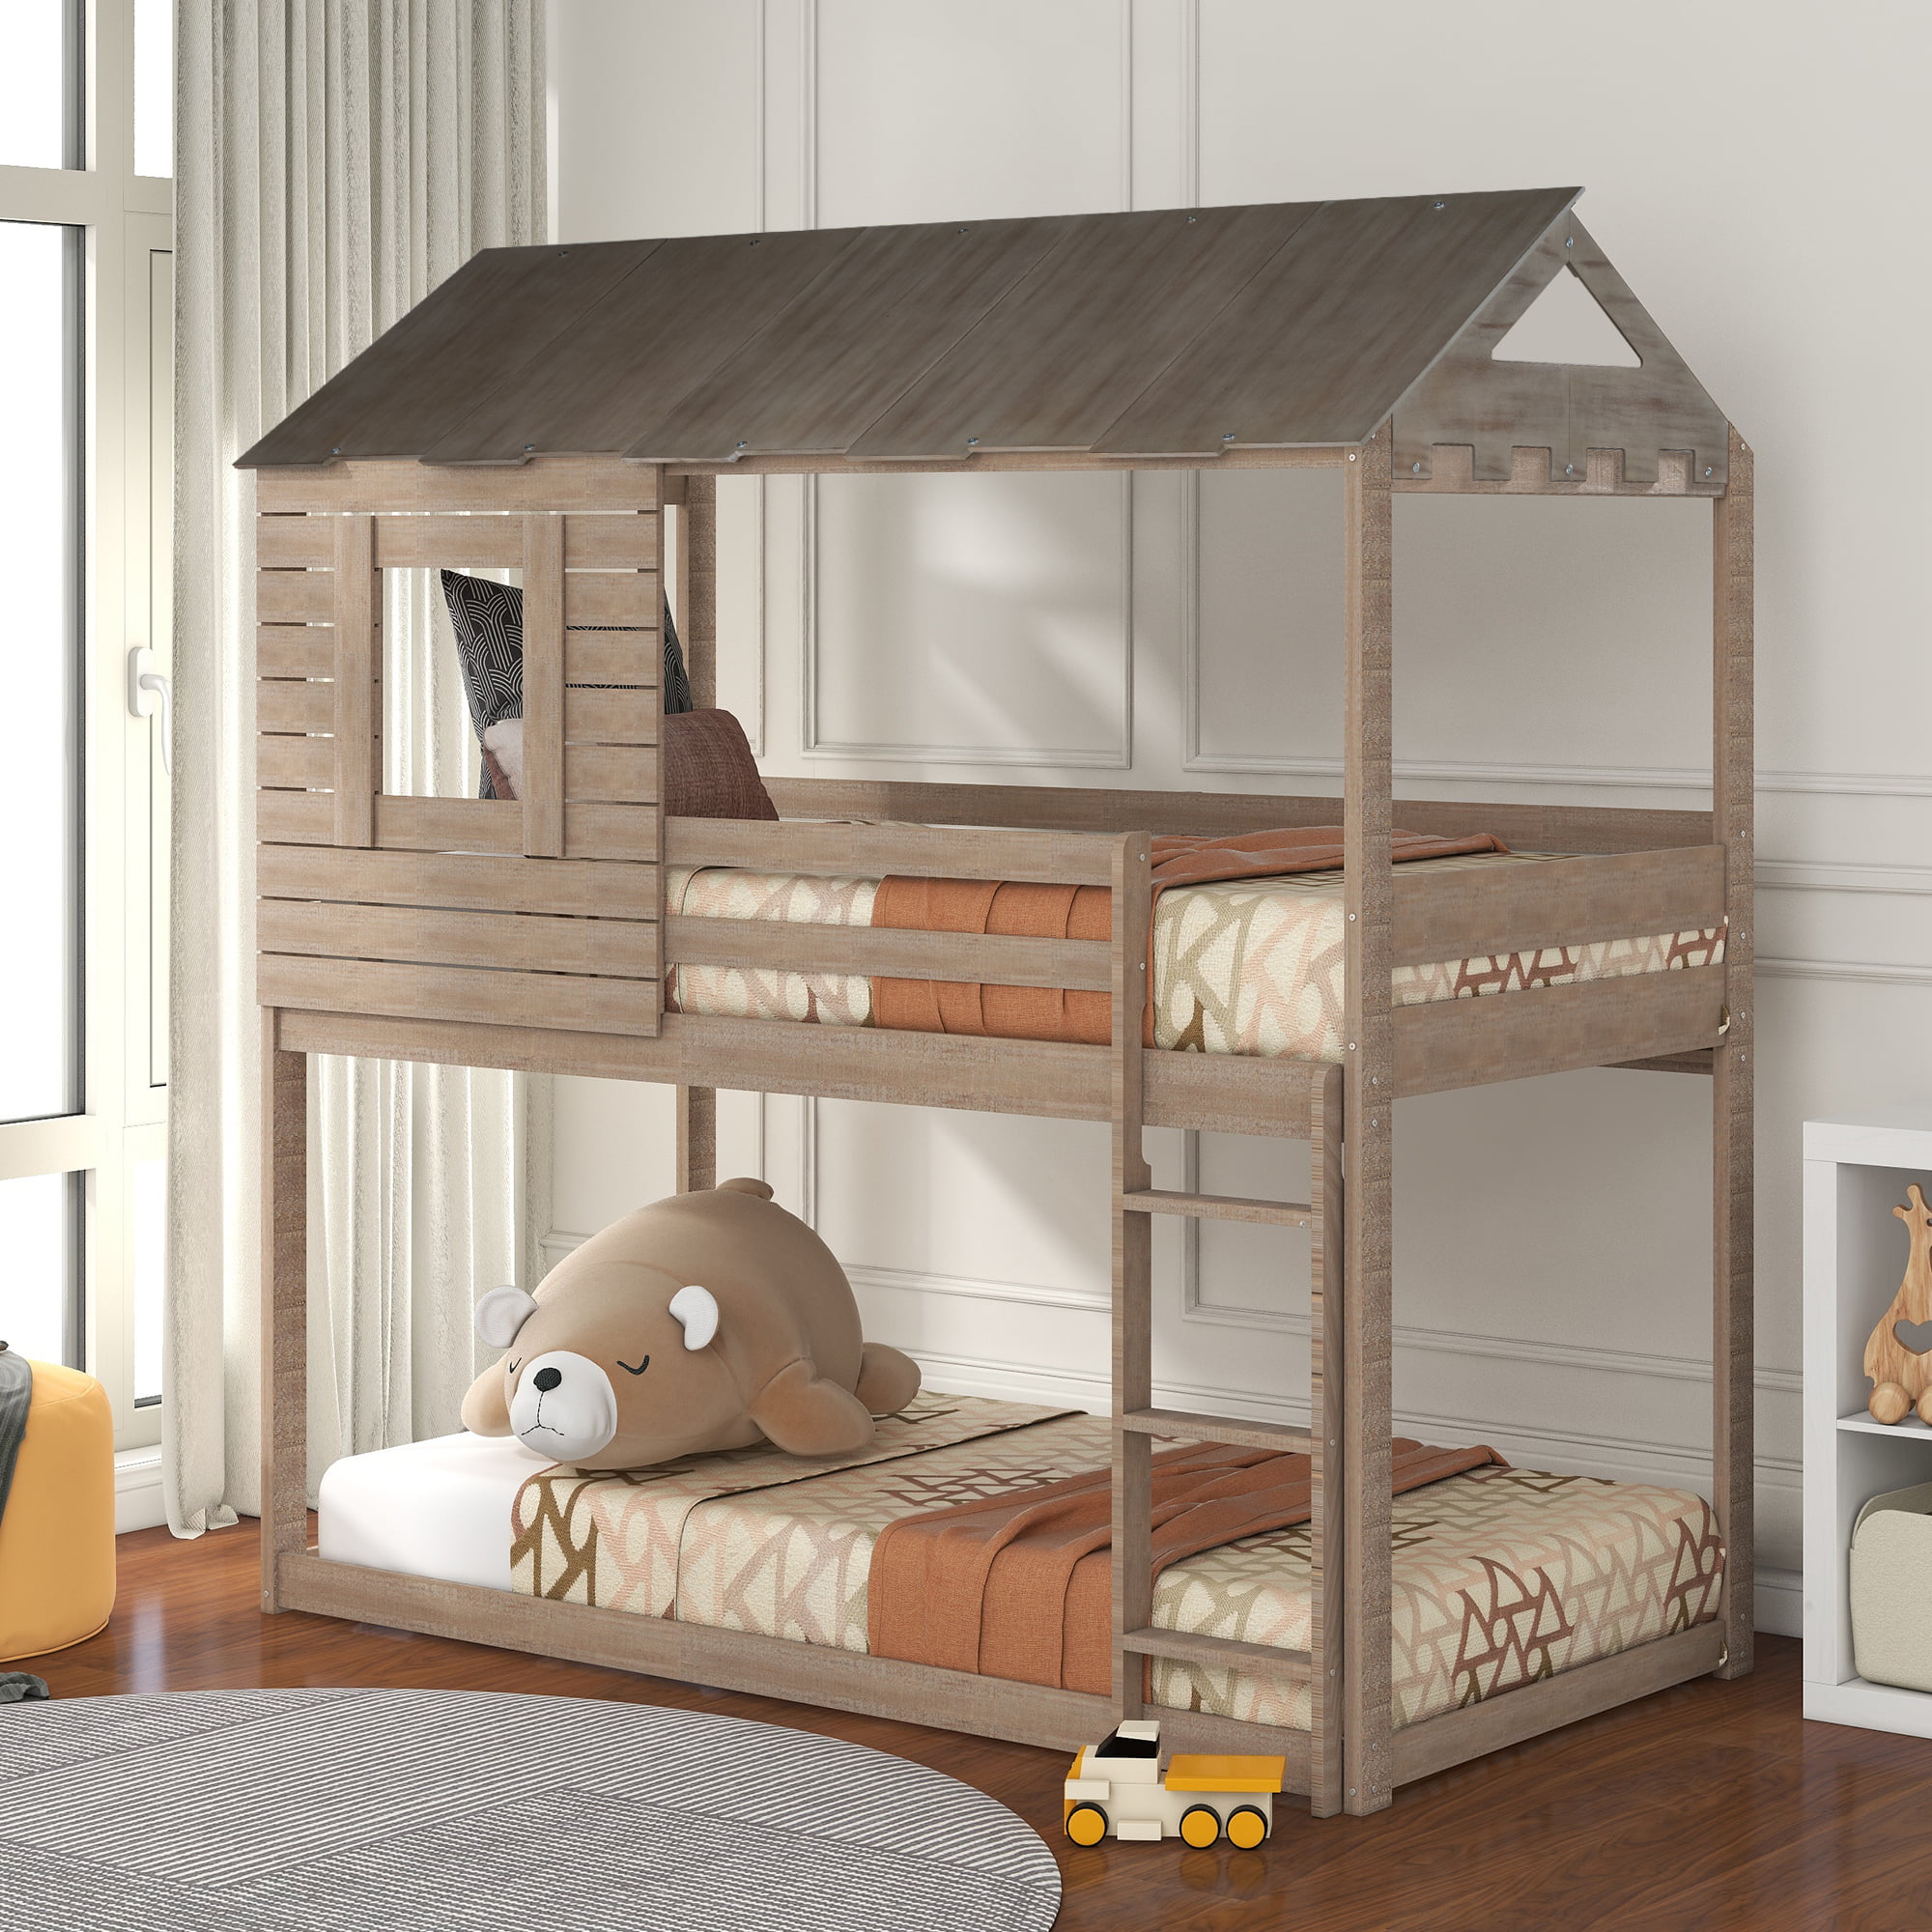 Twin Bunk Bed Frame For Bedroom, How To Make A Twin Size Bunk Bed